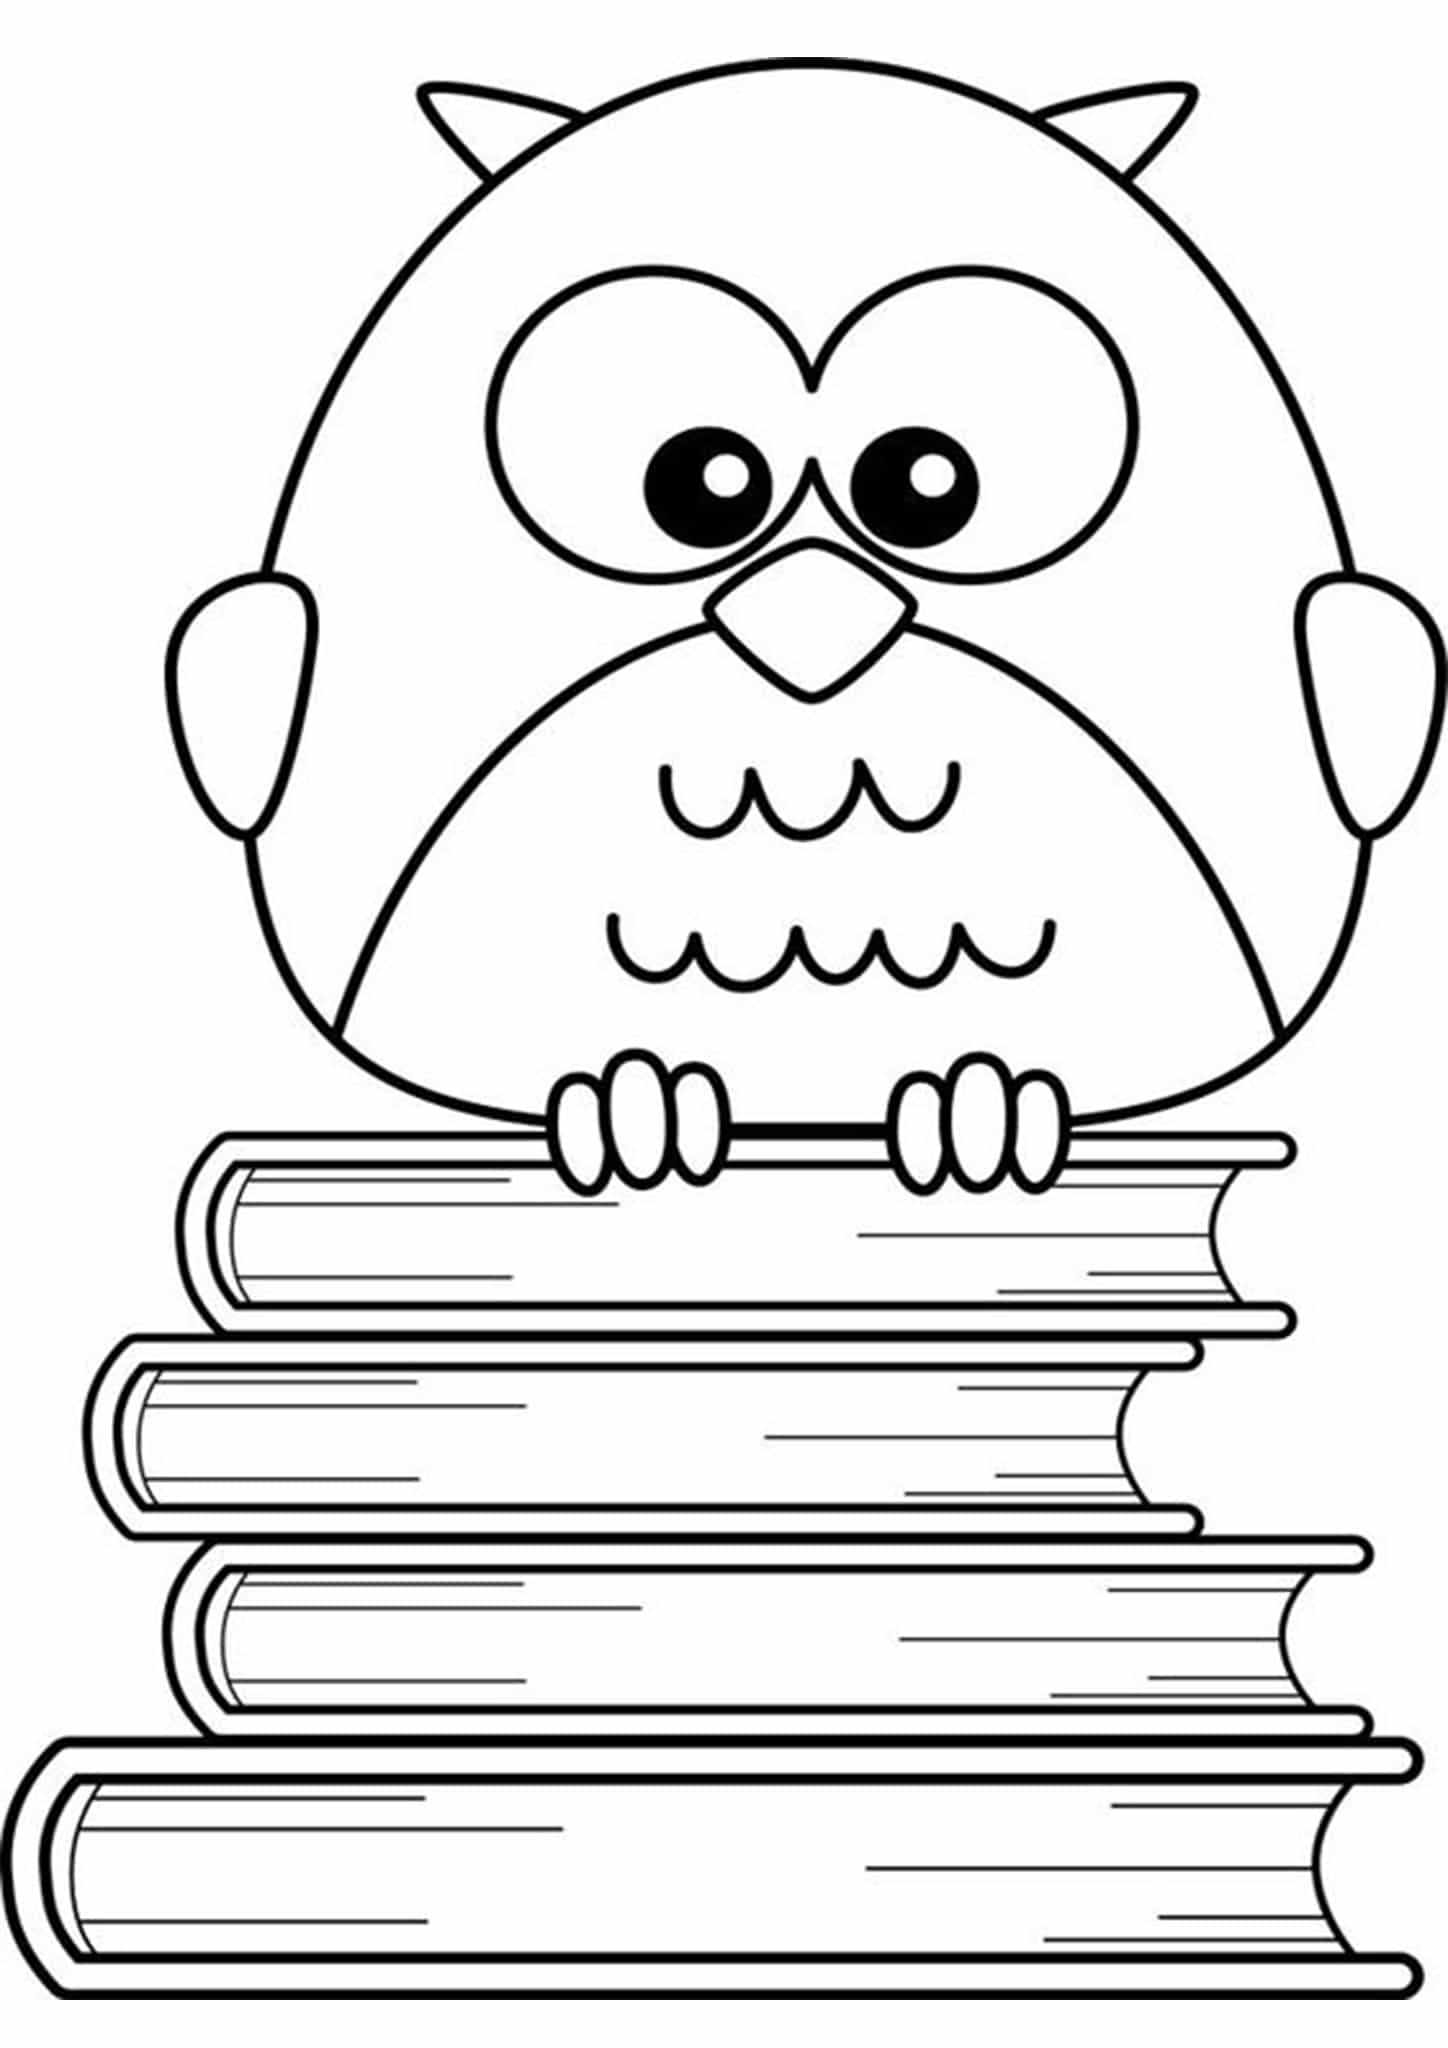 Owl Standing on Books para colorir